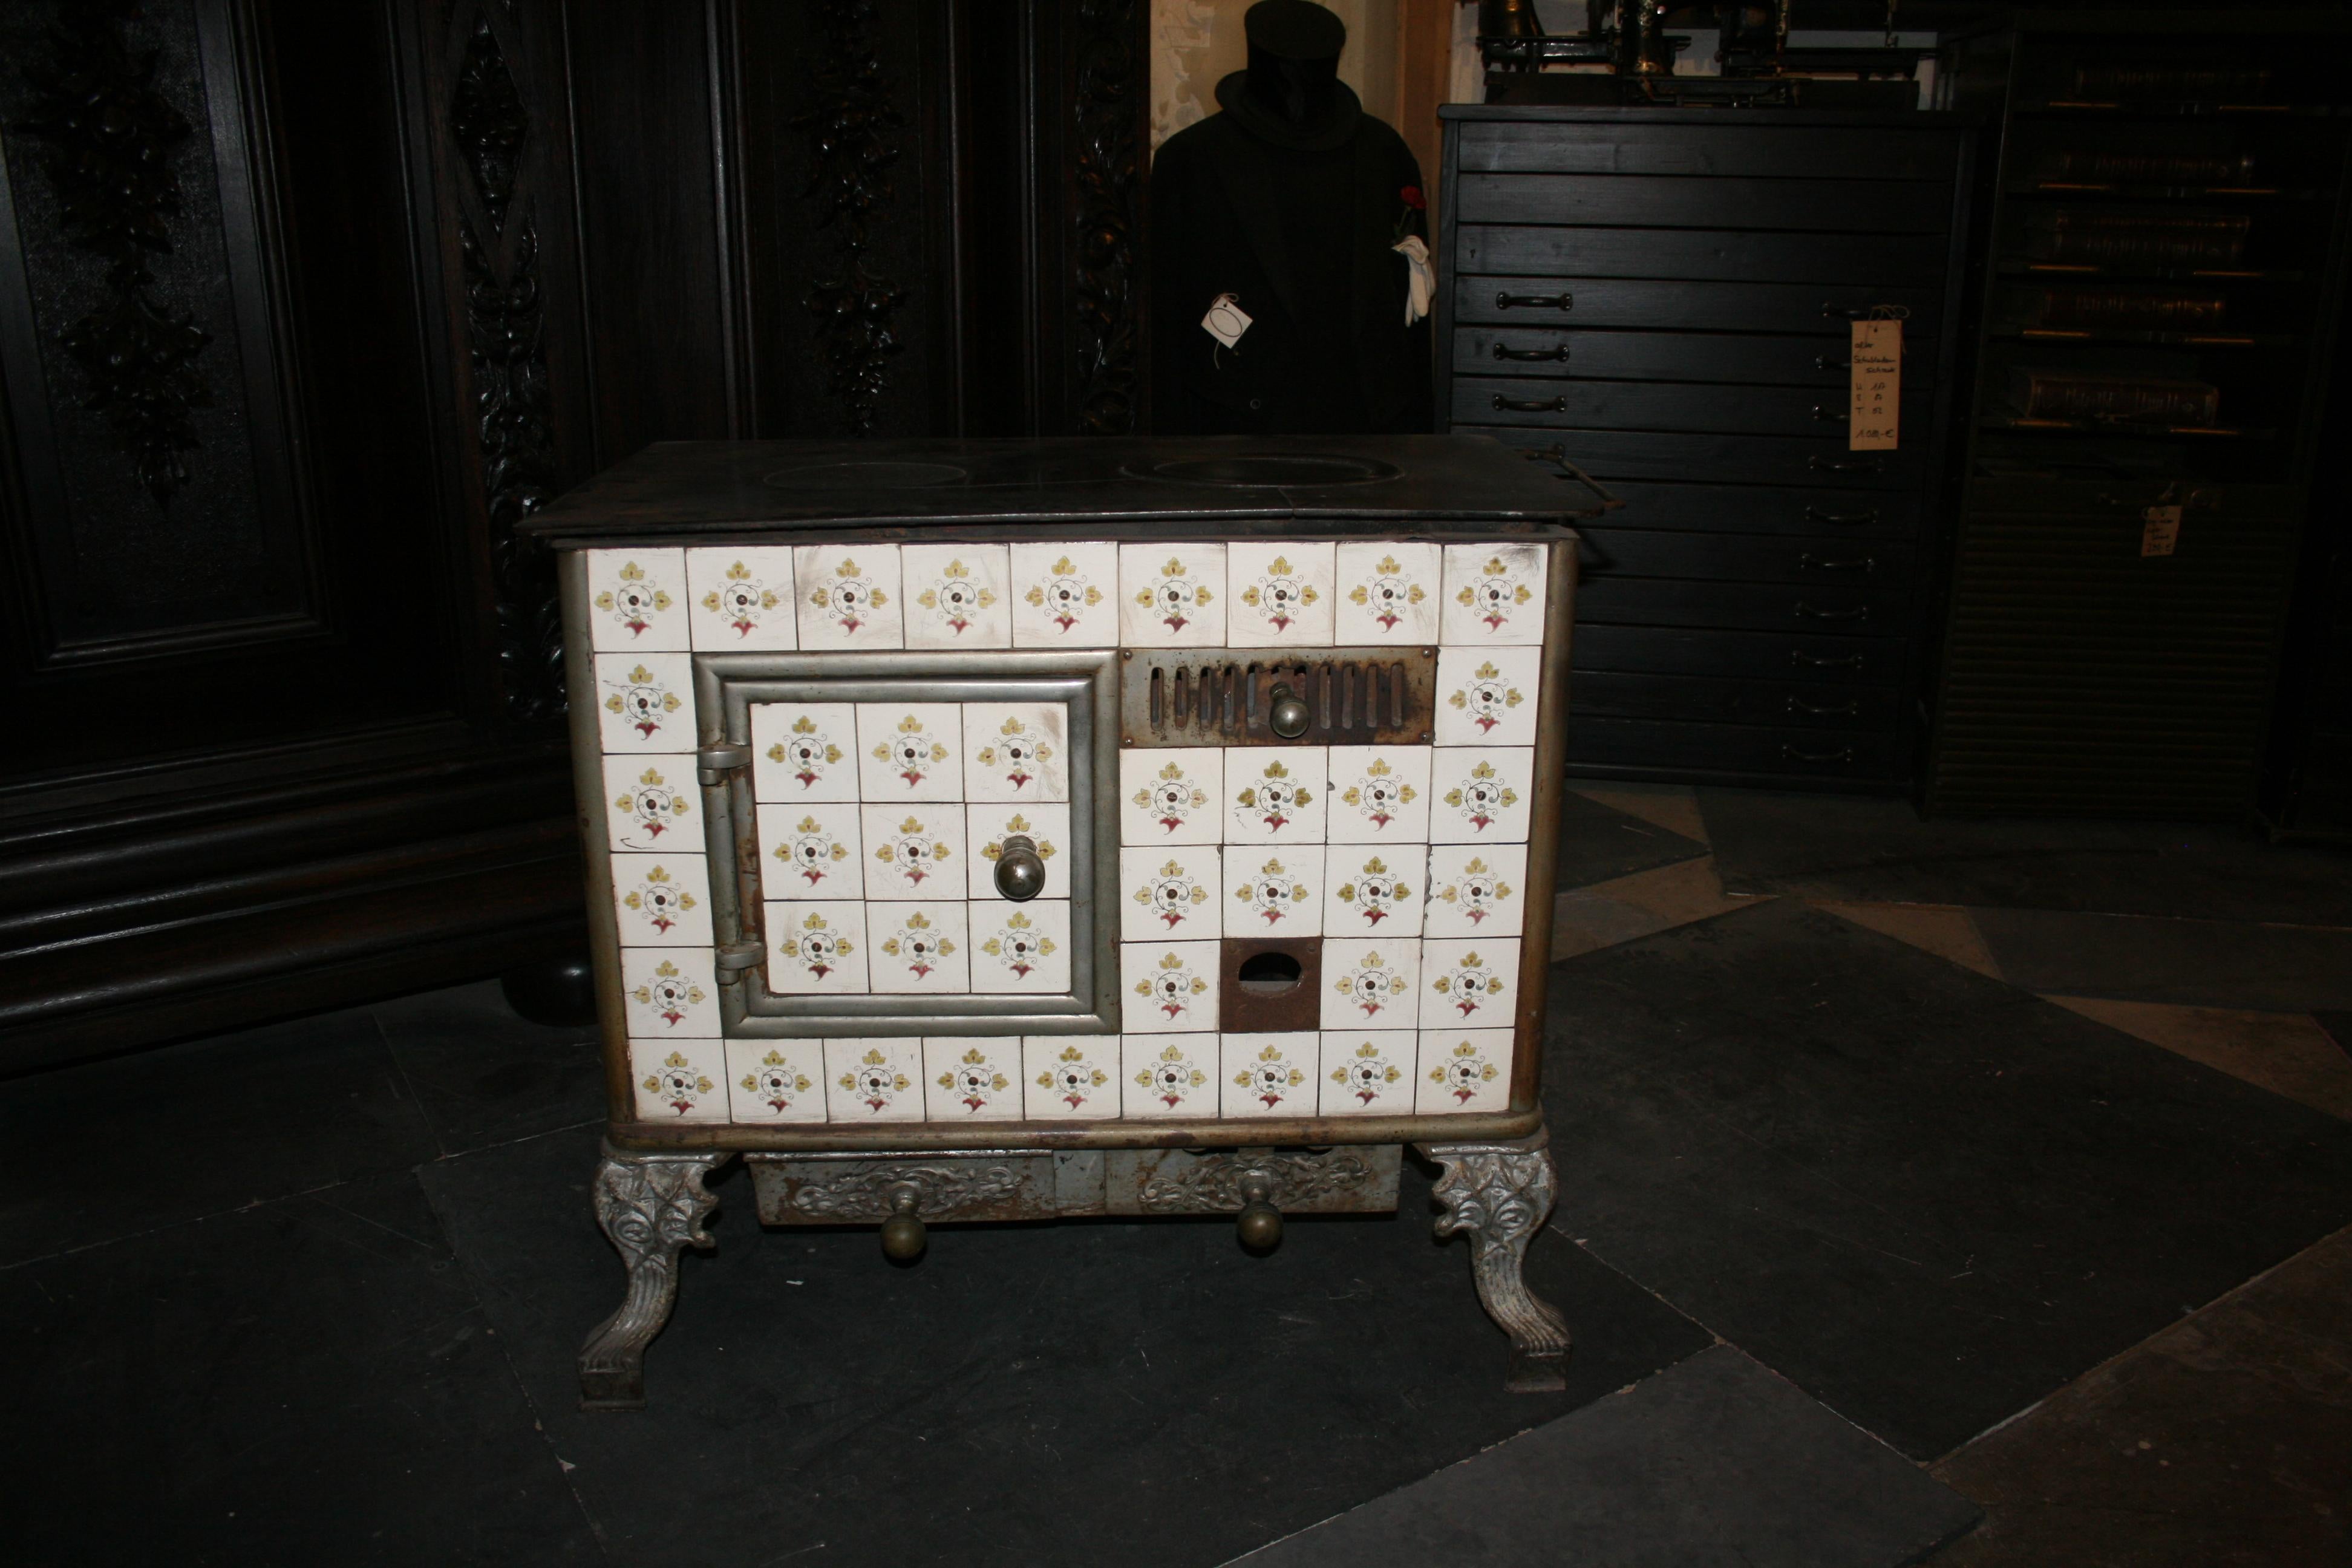 Original antique cast-iron French tiled stove from circa 1890.

Dimensions: 80 cm high, 85 cm wide, 50 cm deep.